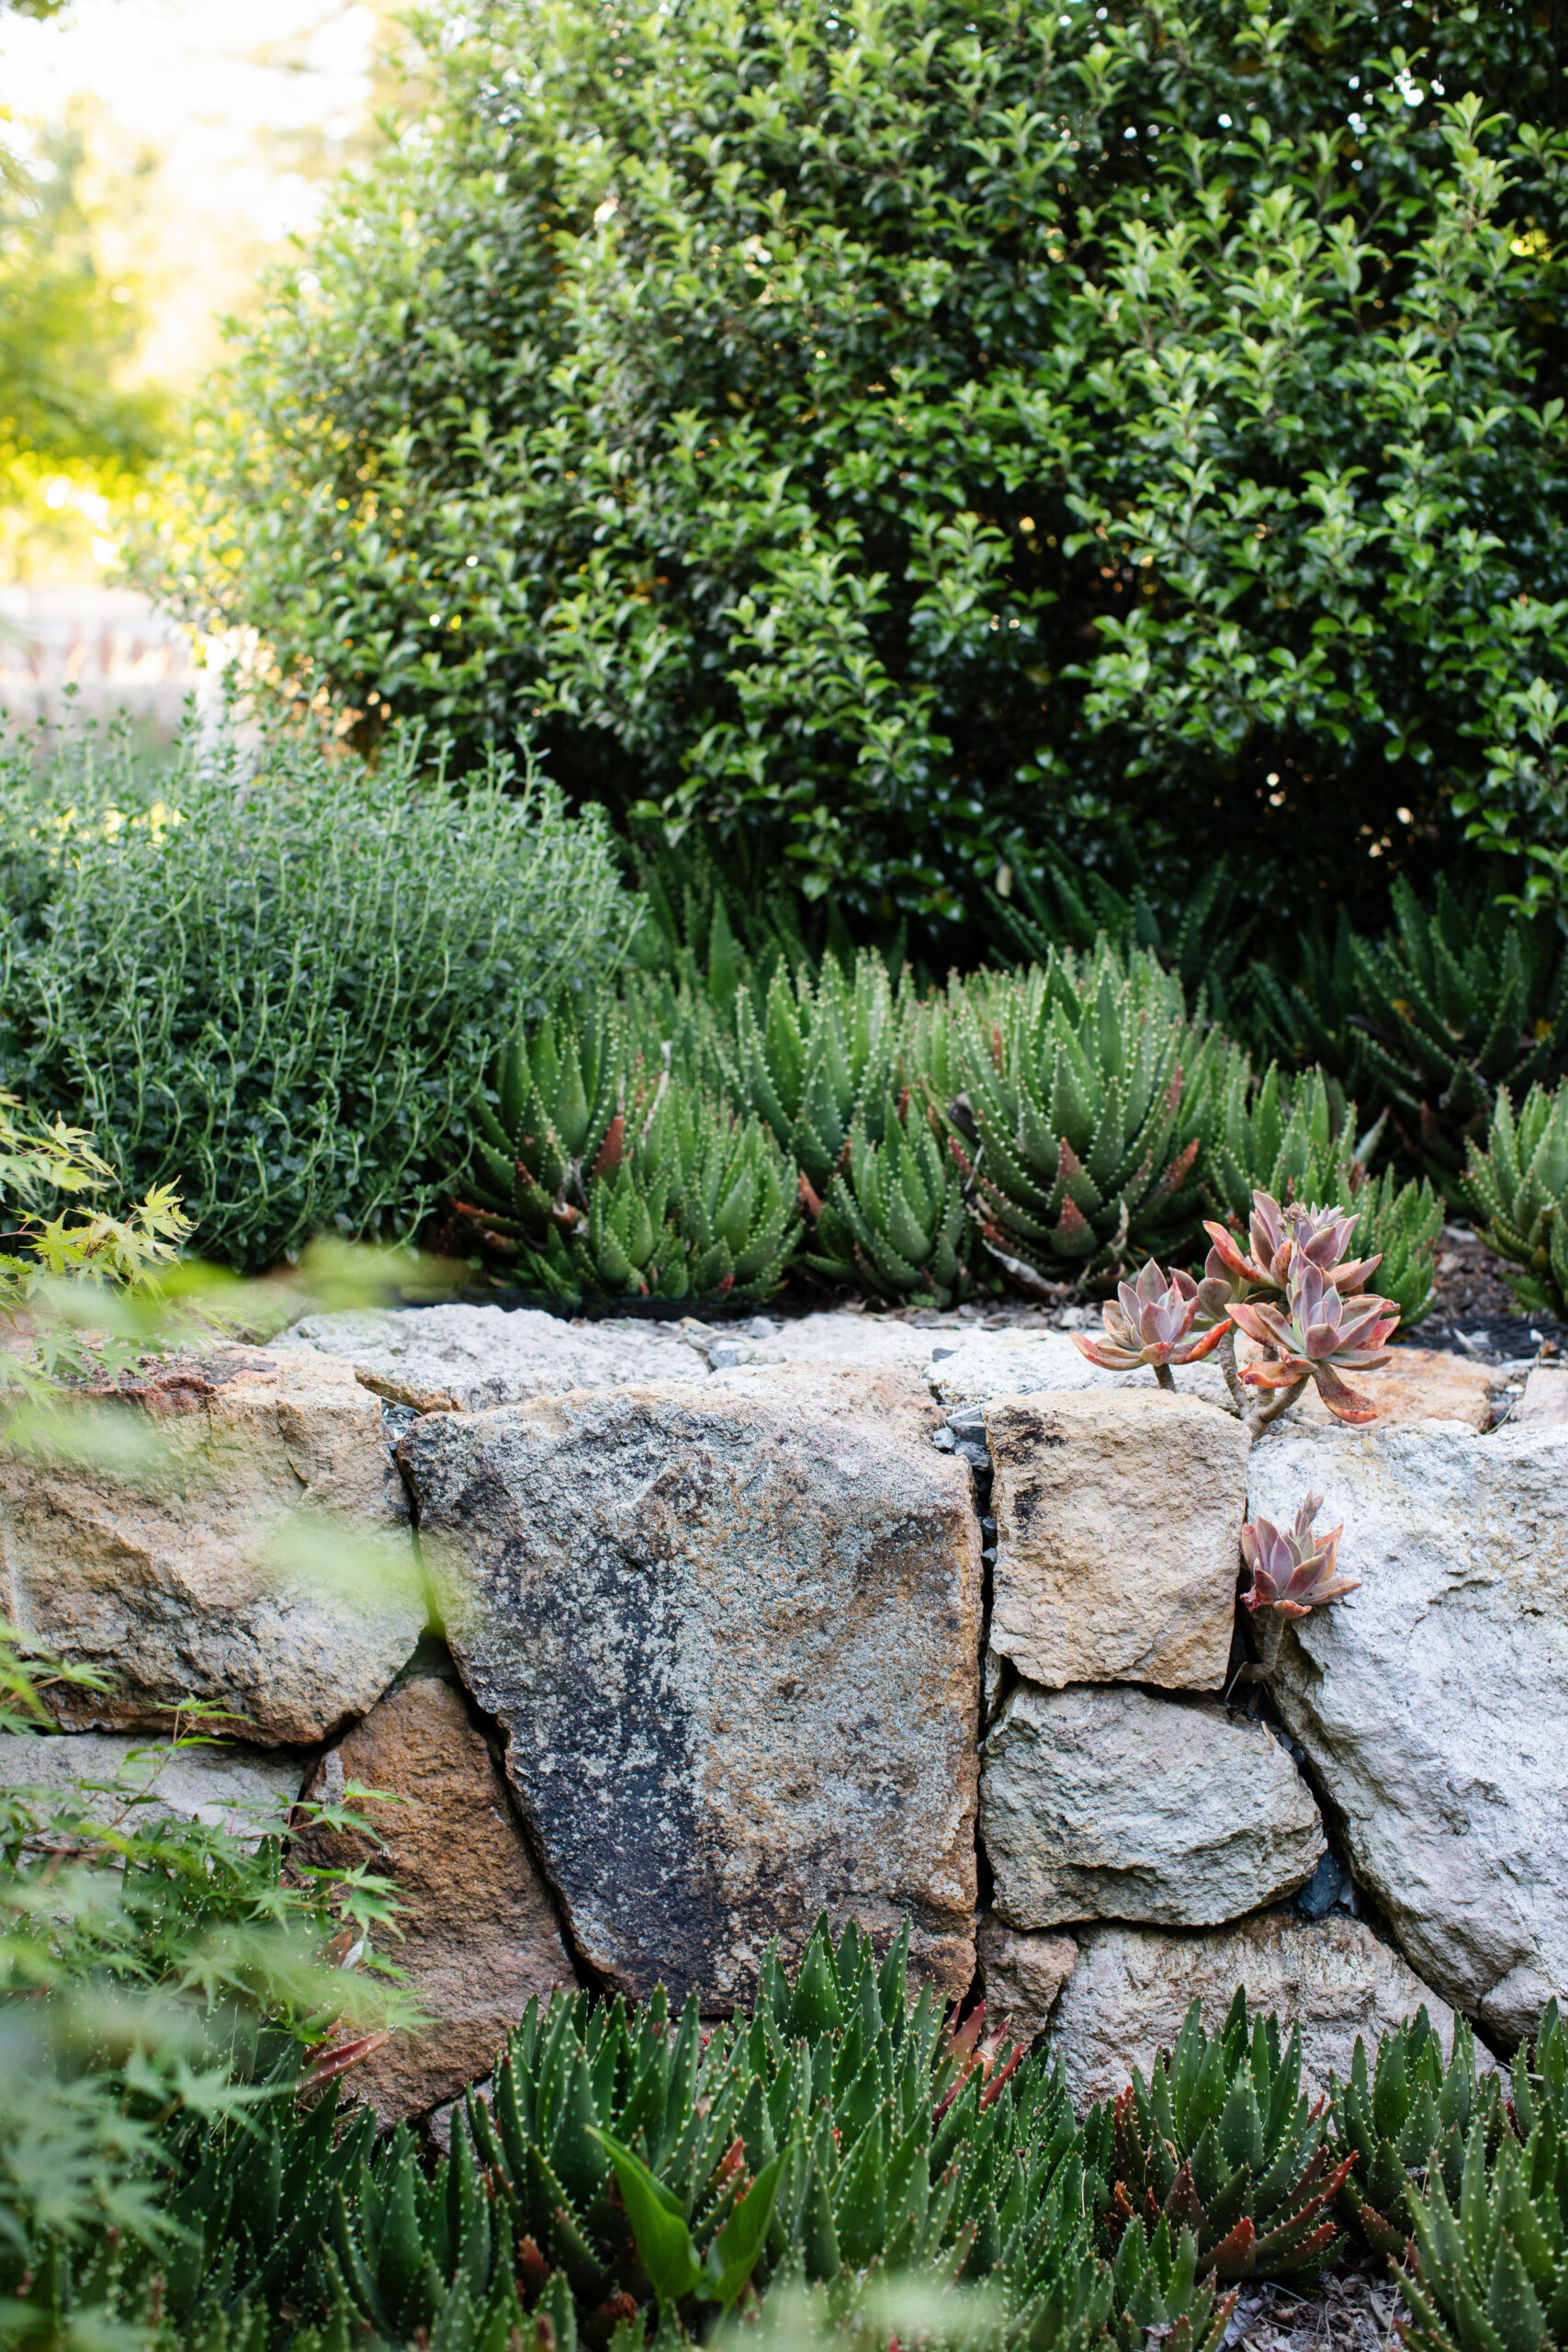 Colorful succulents are interplanted among the stones in the retaining walls. (Eileen Roche)